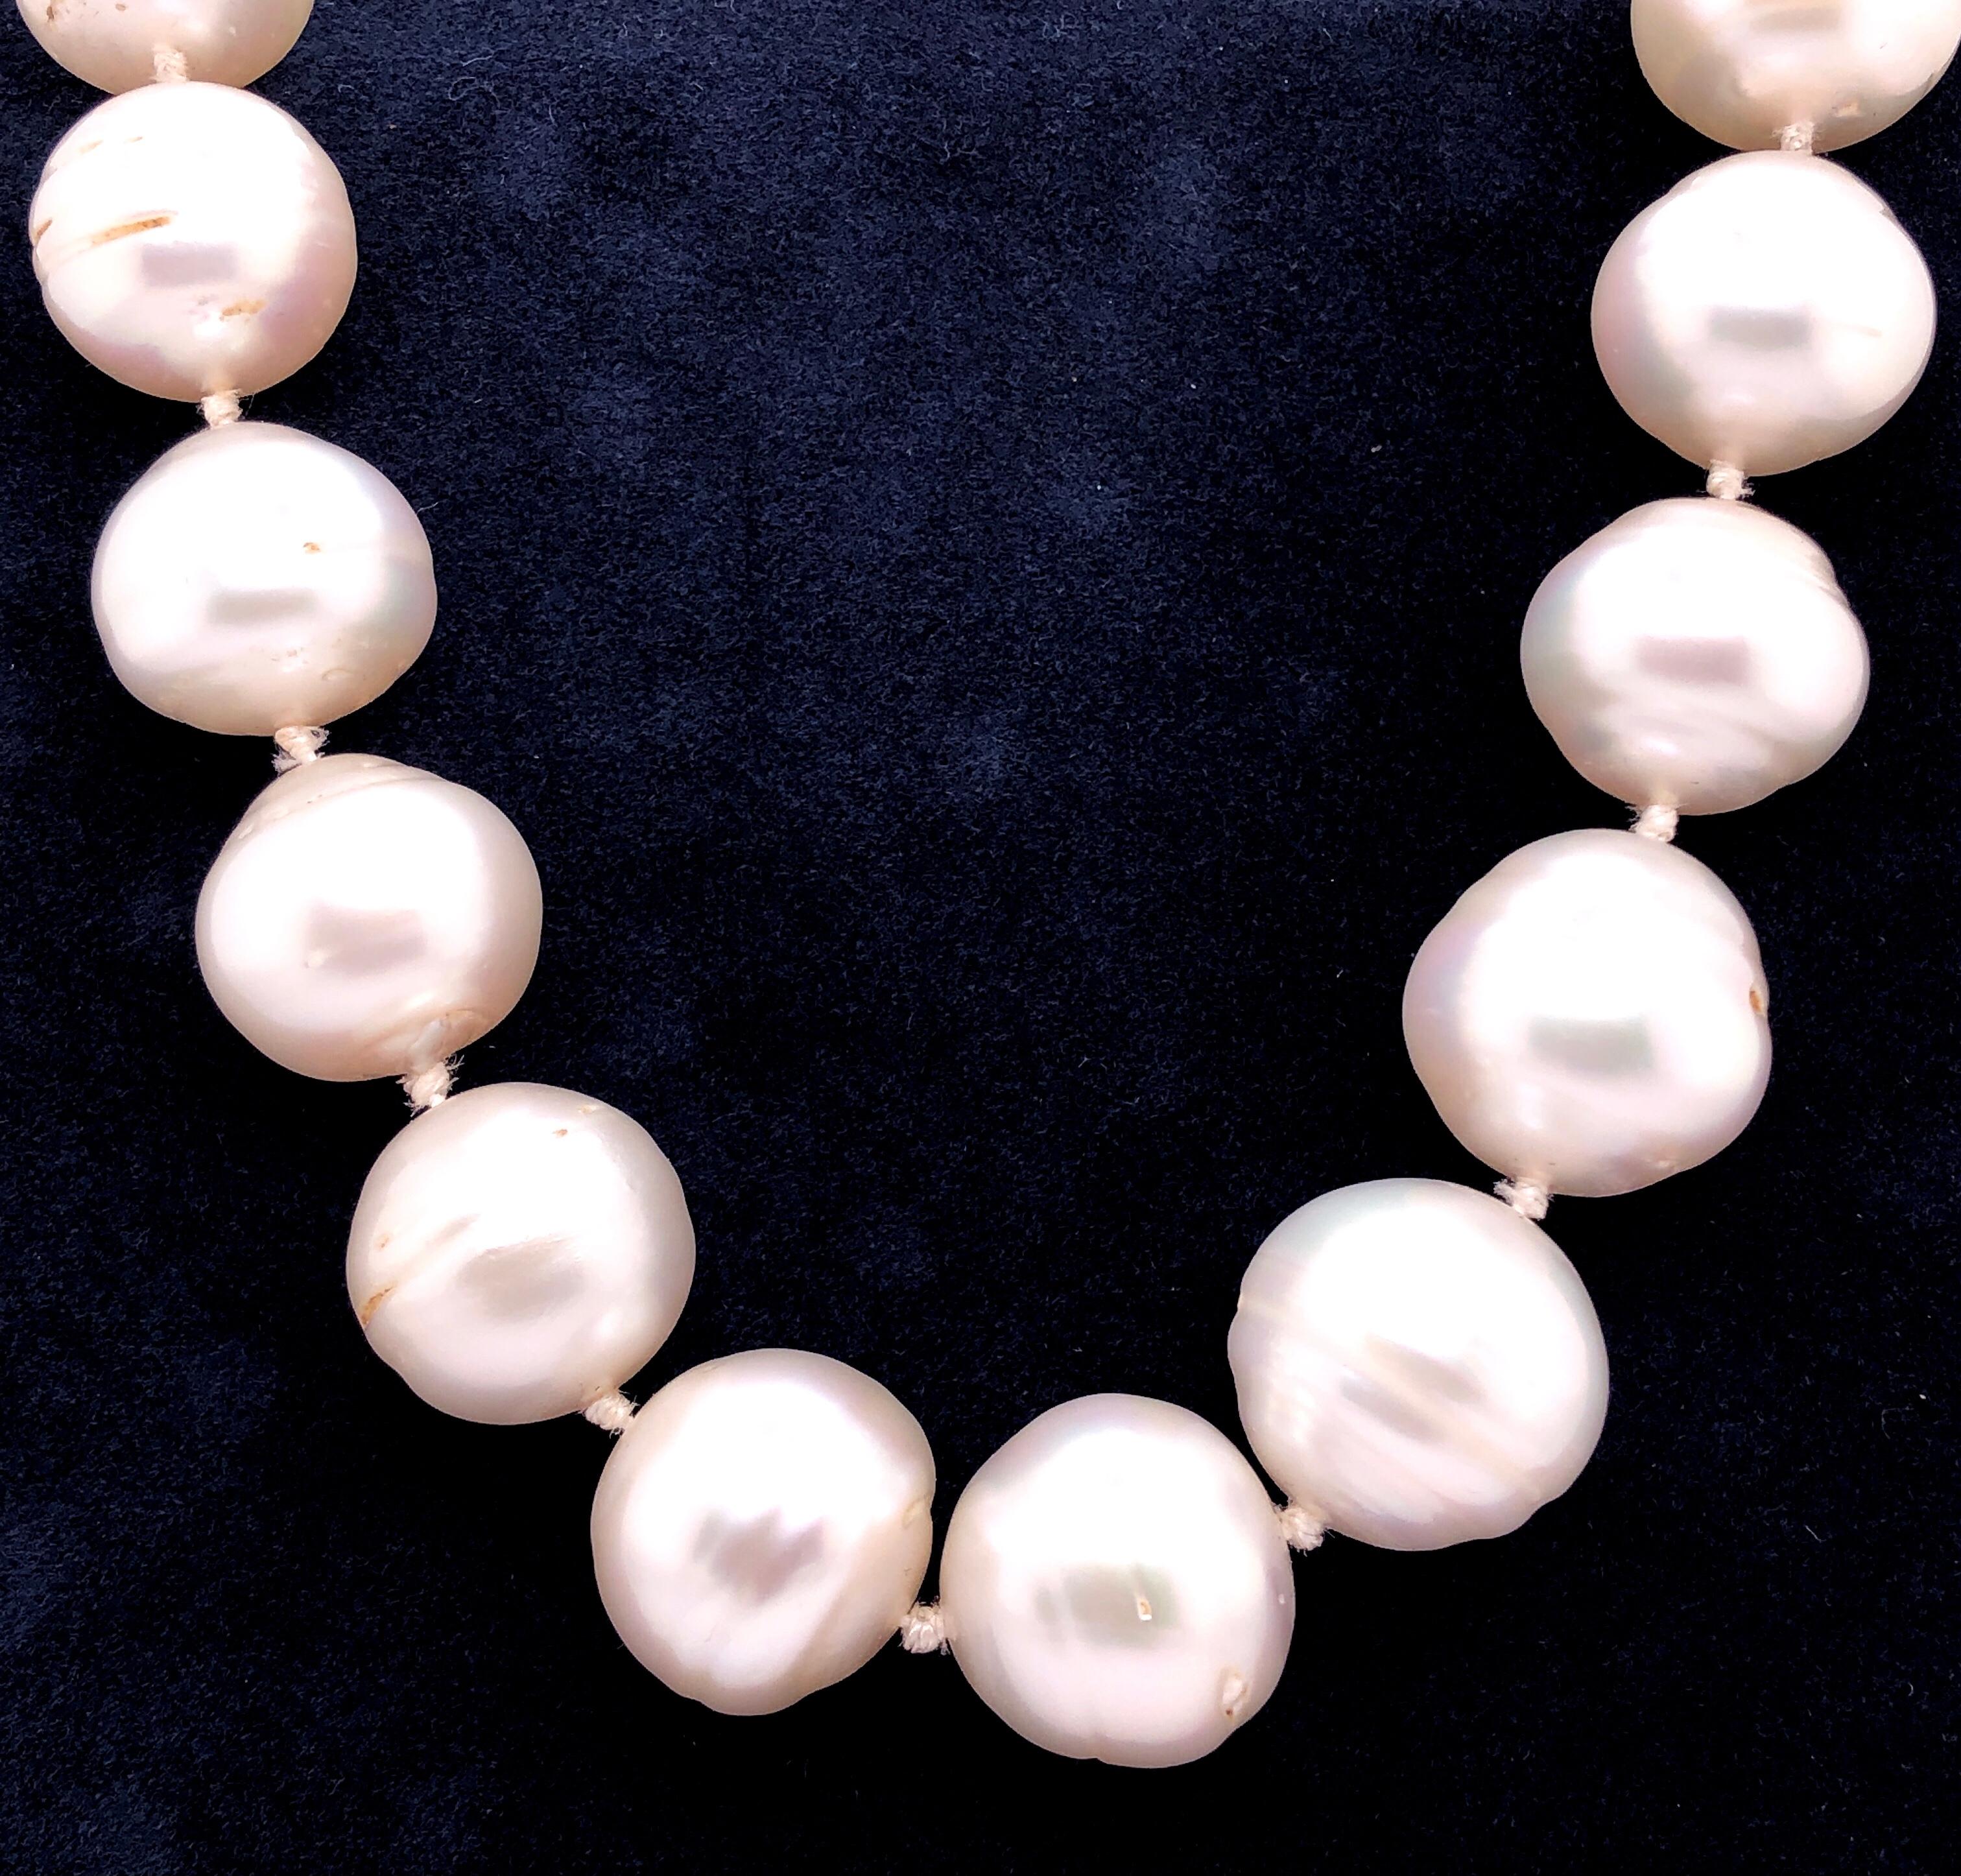 Verdura 20 inch Pearl Necklace.
Short strand of 23 graduated baroque white south sea pearls on a pearl plunger clasp (included in pearl count). 124.4 grams total weight. Approx size of pearls 17.75mm on average. 

Provenance:
A NYC Socialite
Vedura